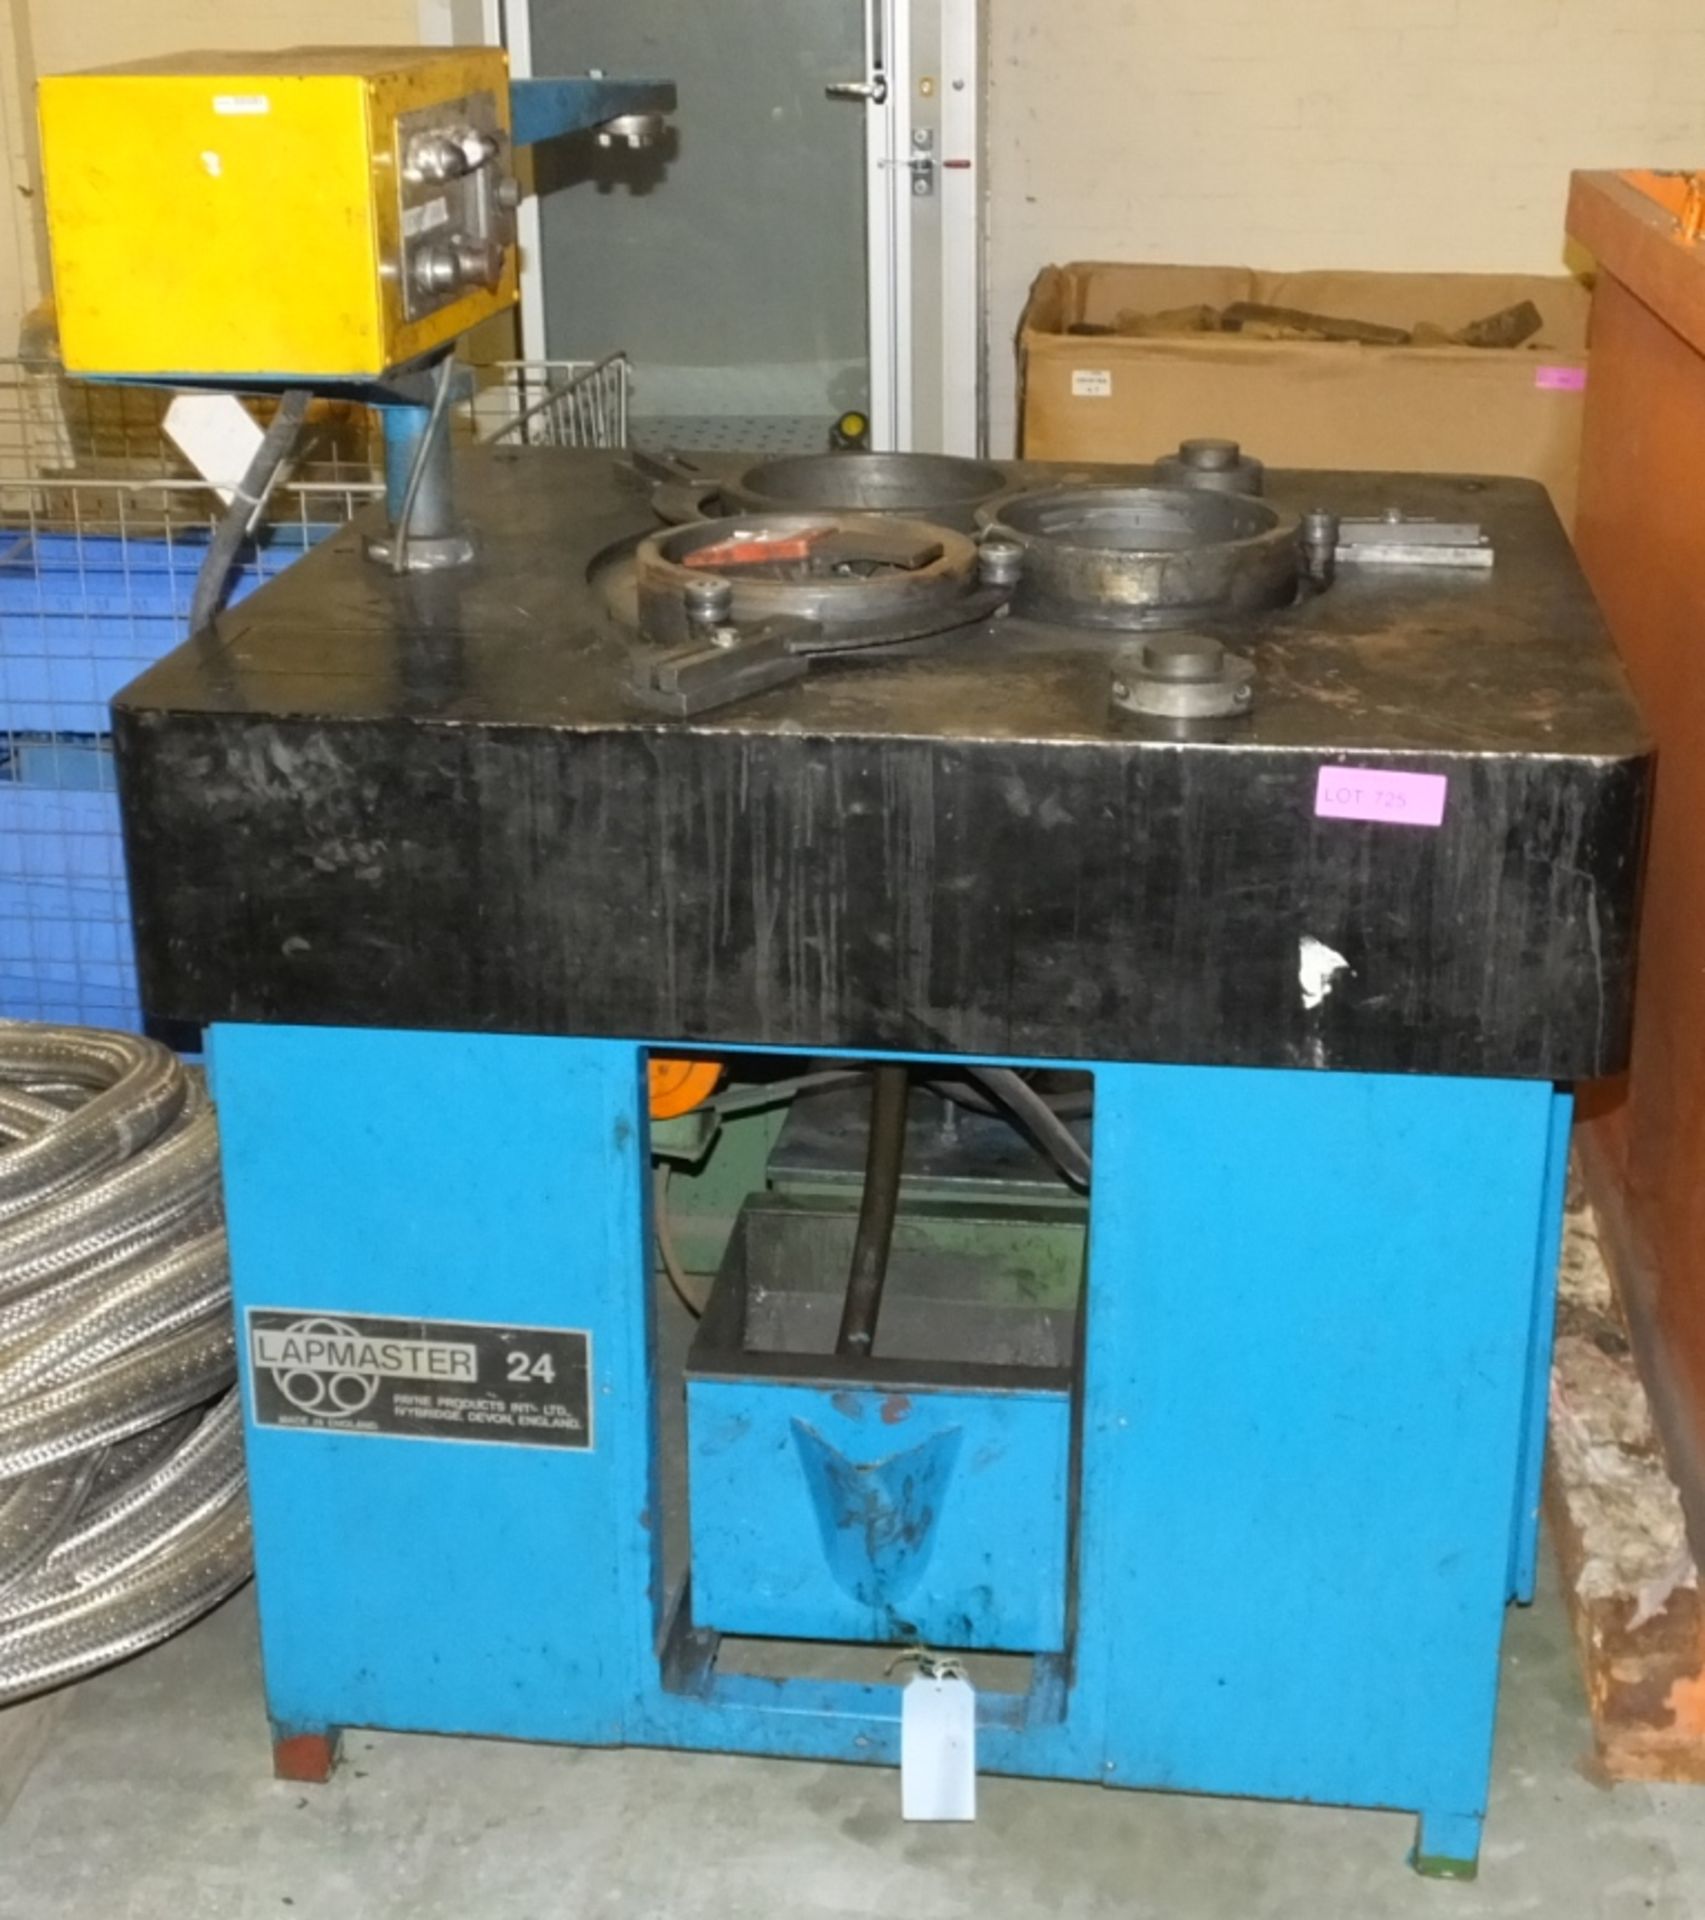 Lapmaster Wolters Model 24 Lapping Machine - £5+VAT lift out charge applied to this lot